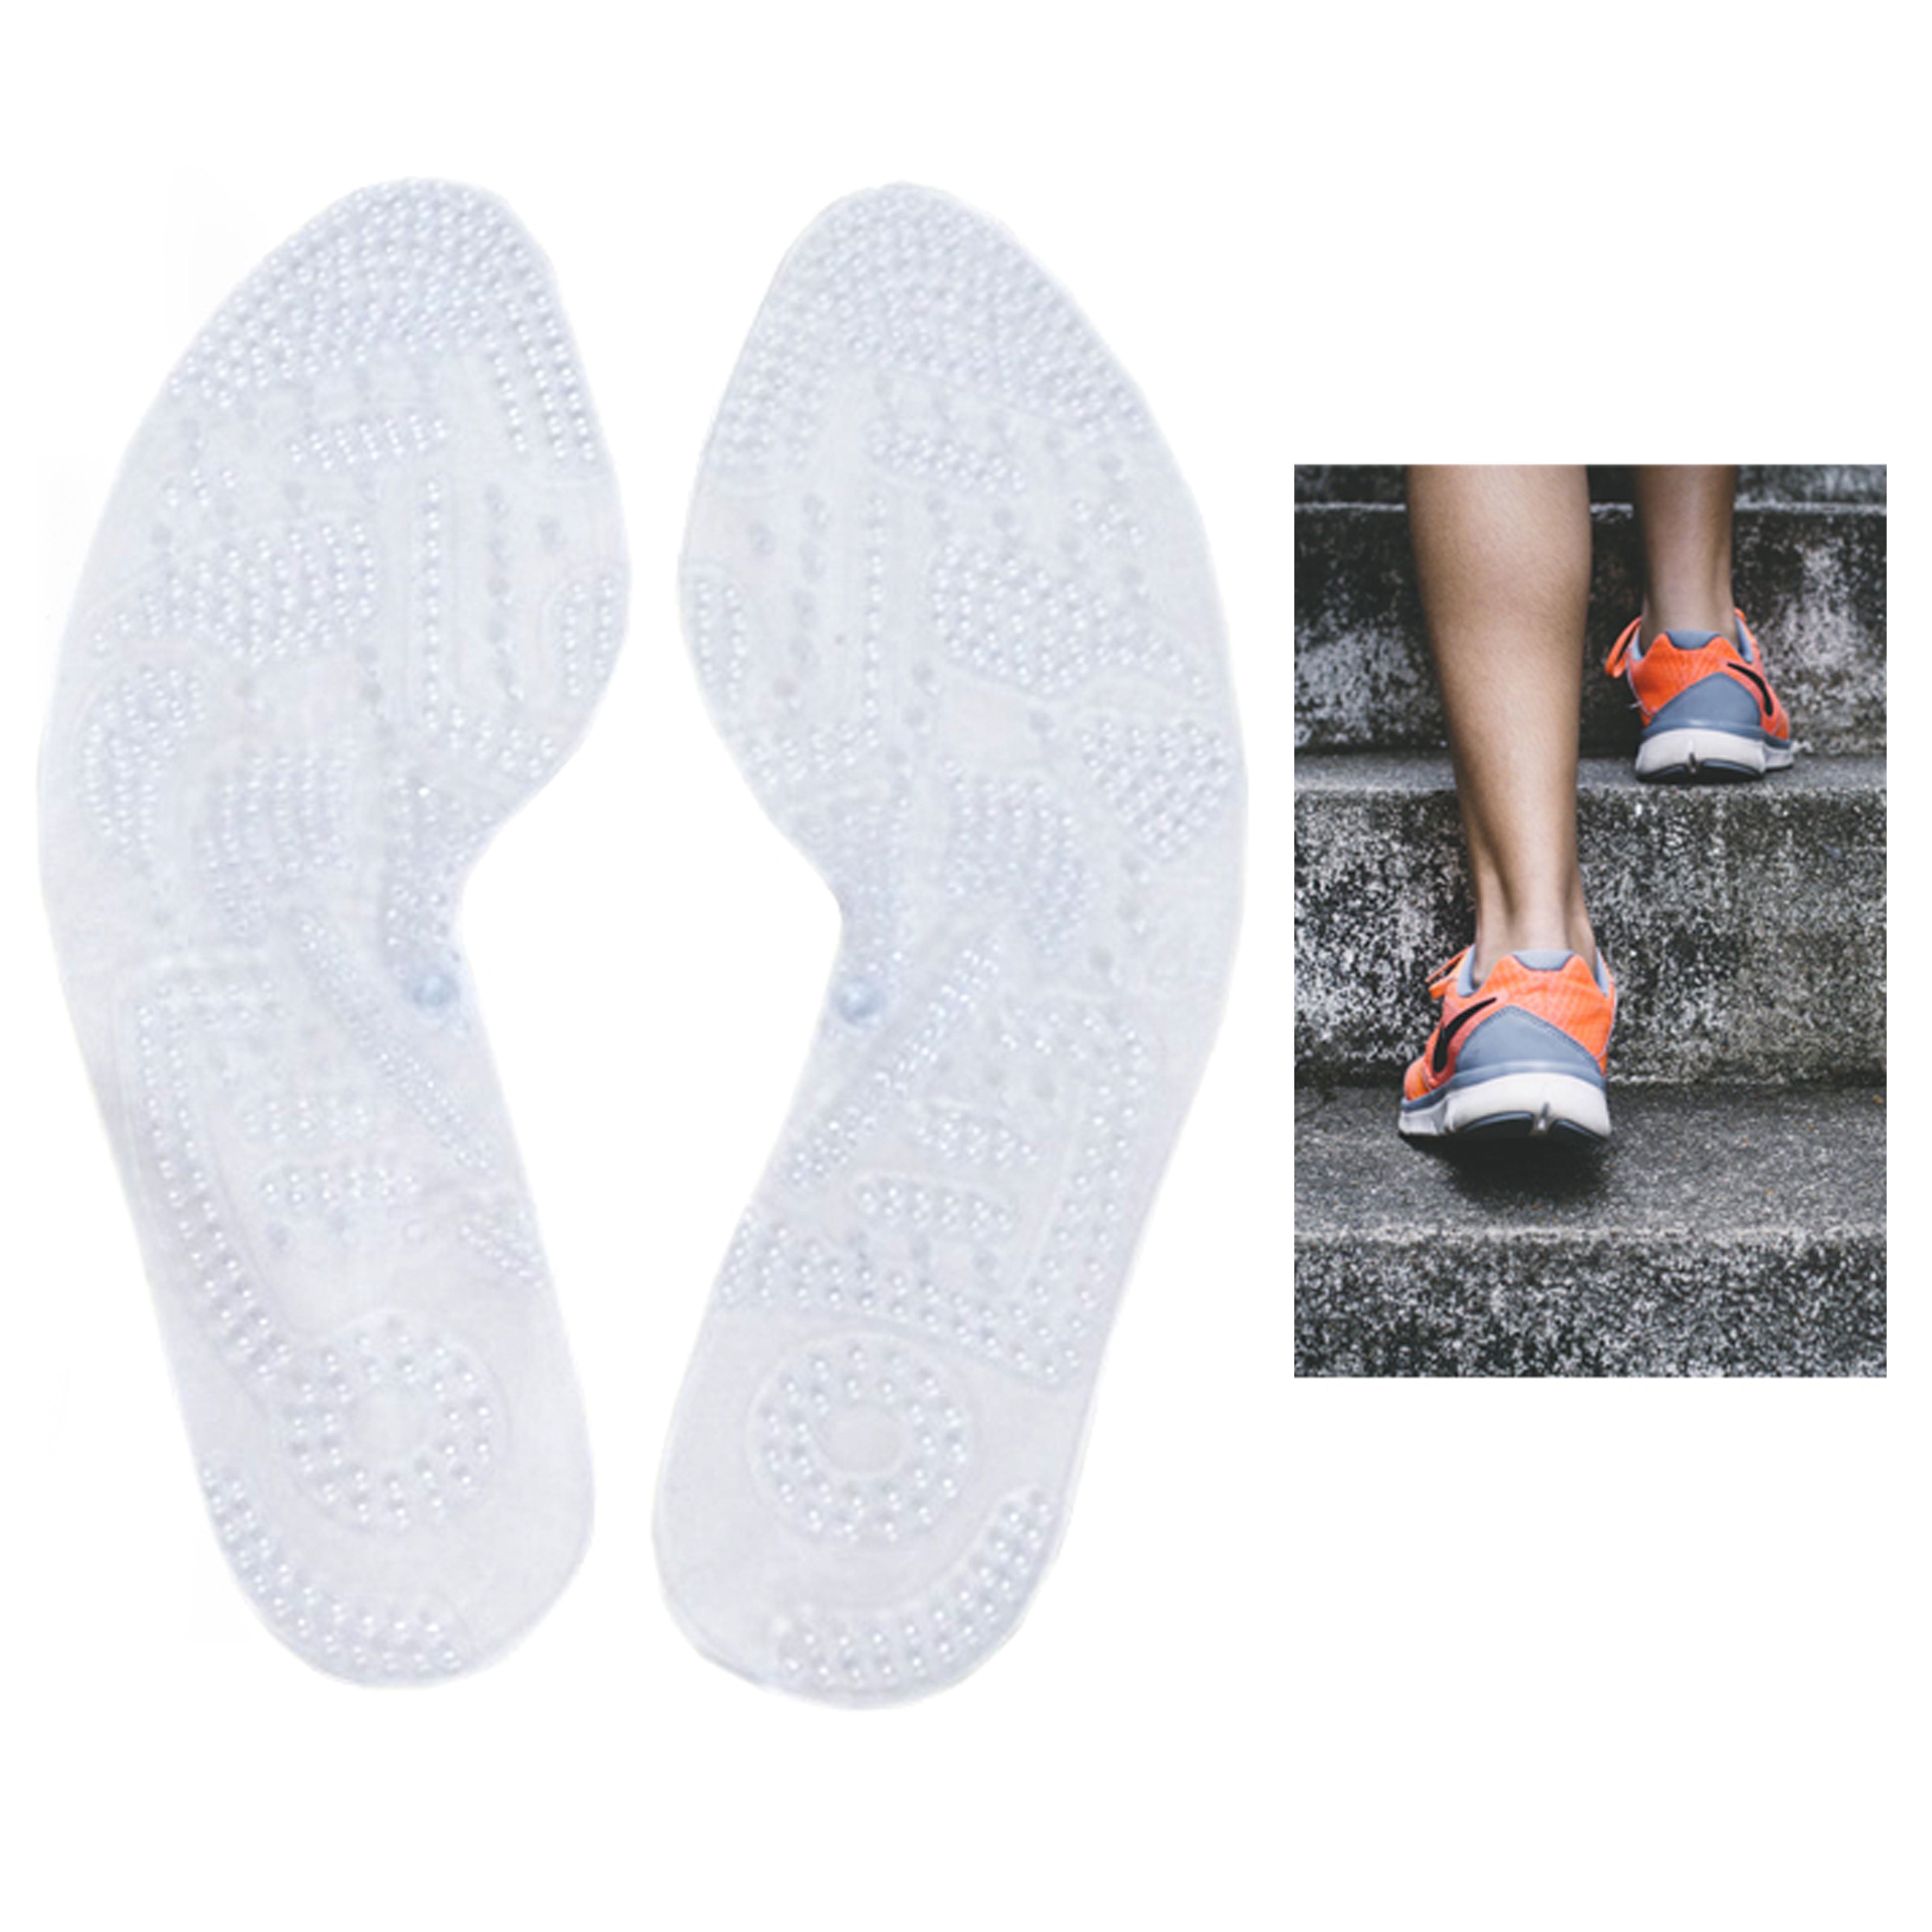 Details about   Sport Gel Insoles Orthotic Arch Foot Support Running Shoe Pad Inserts Cushions